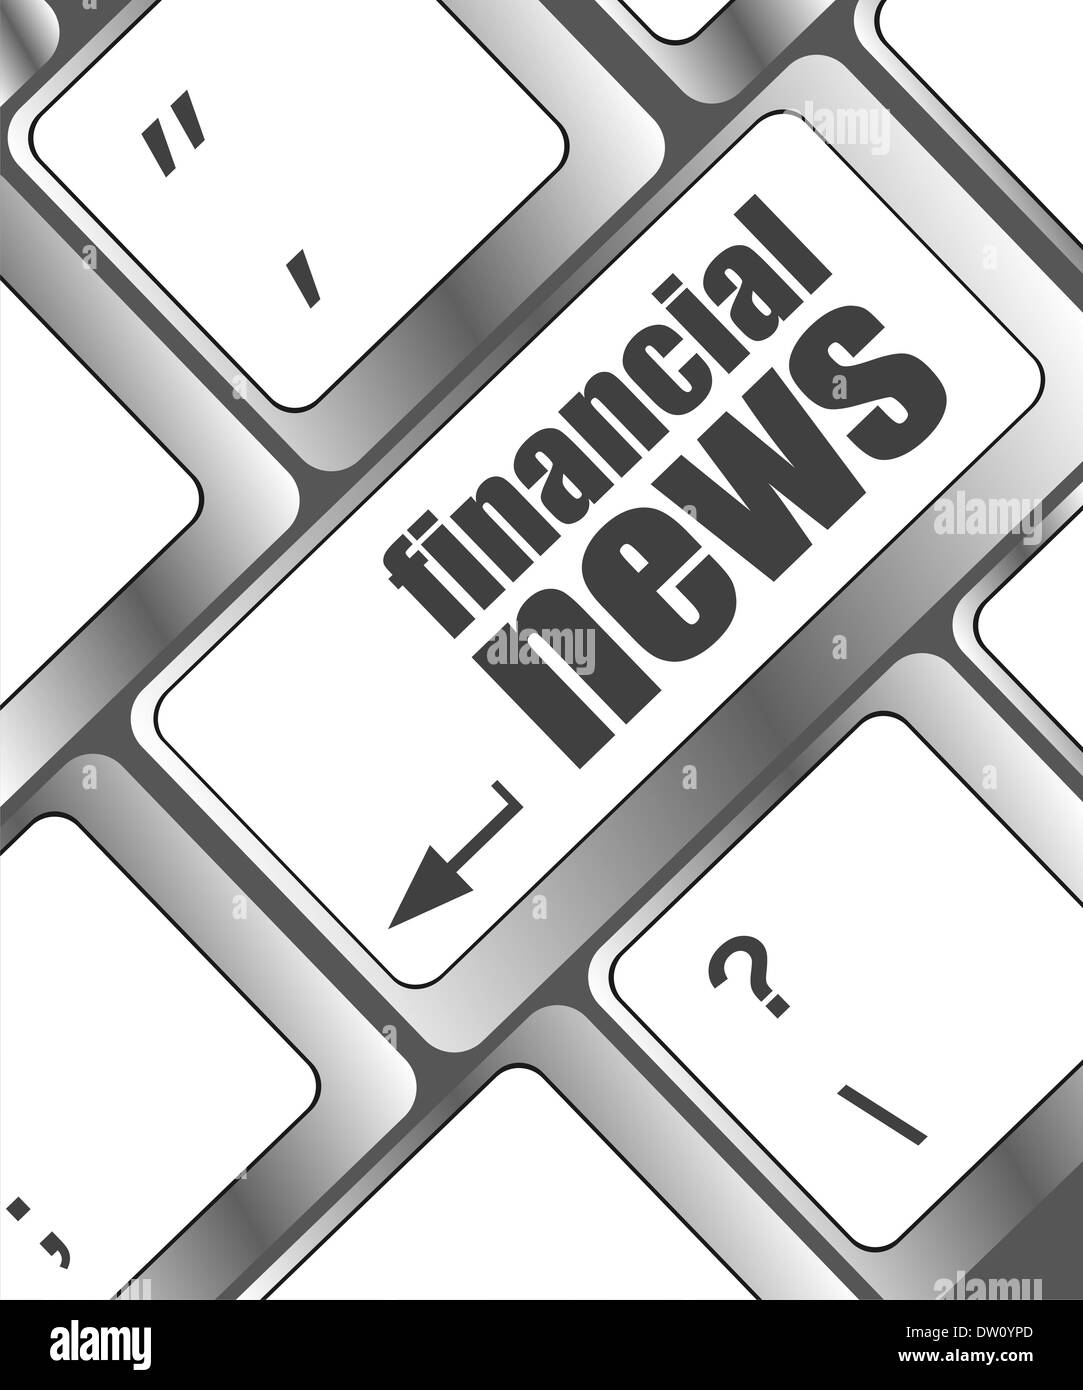 financial news button on computer keyboard Stock Photo